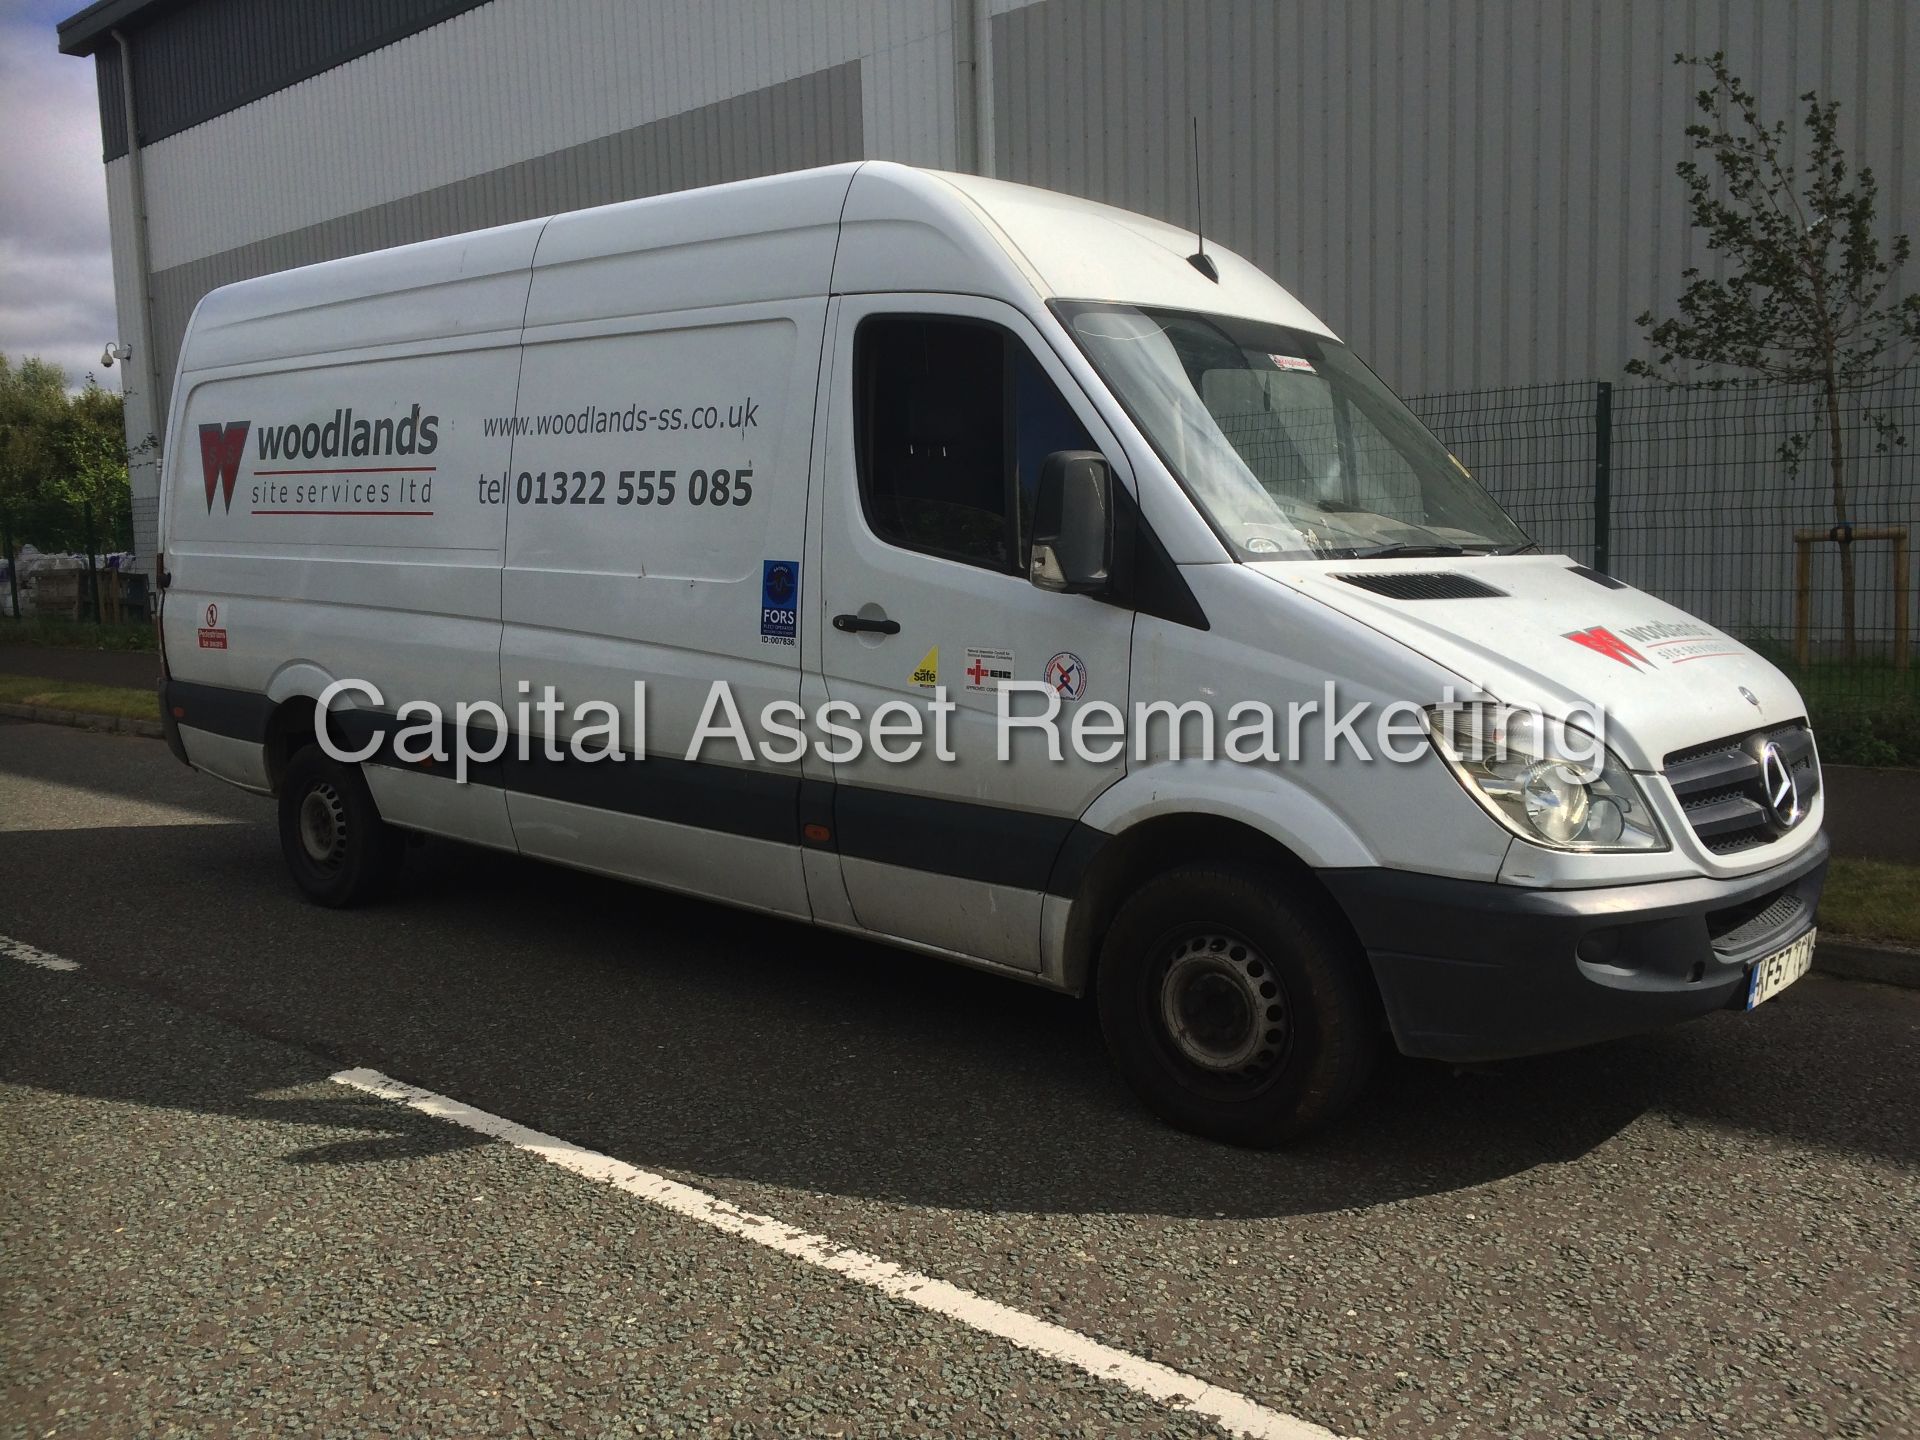 (ON SALE) MERCEDES SPRINTER 311CDI "110BHP - 6 SPEED" (2008 YEAR) LWB - SERVICE REPORTS / LOW MILAGE